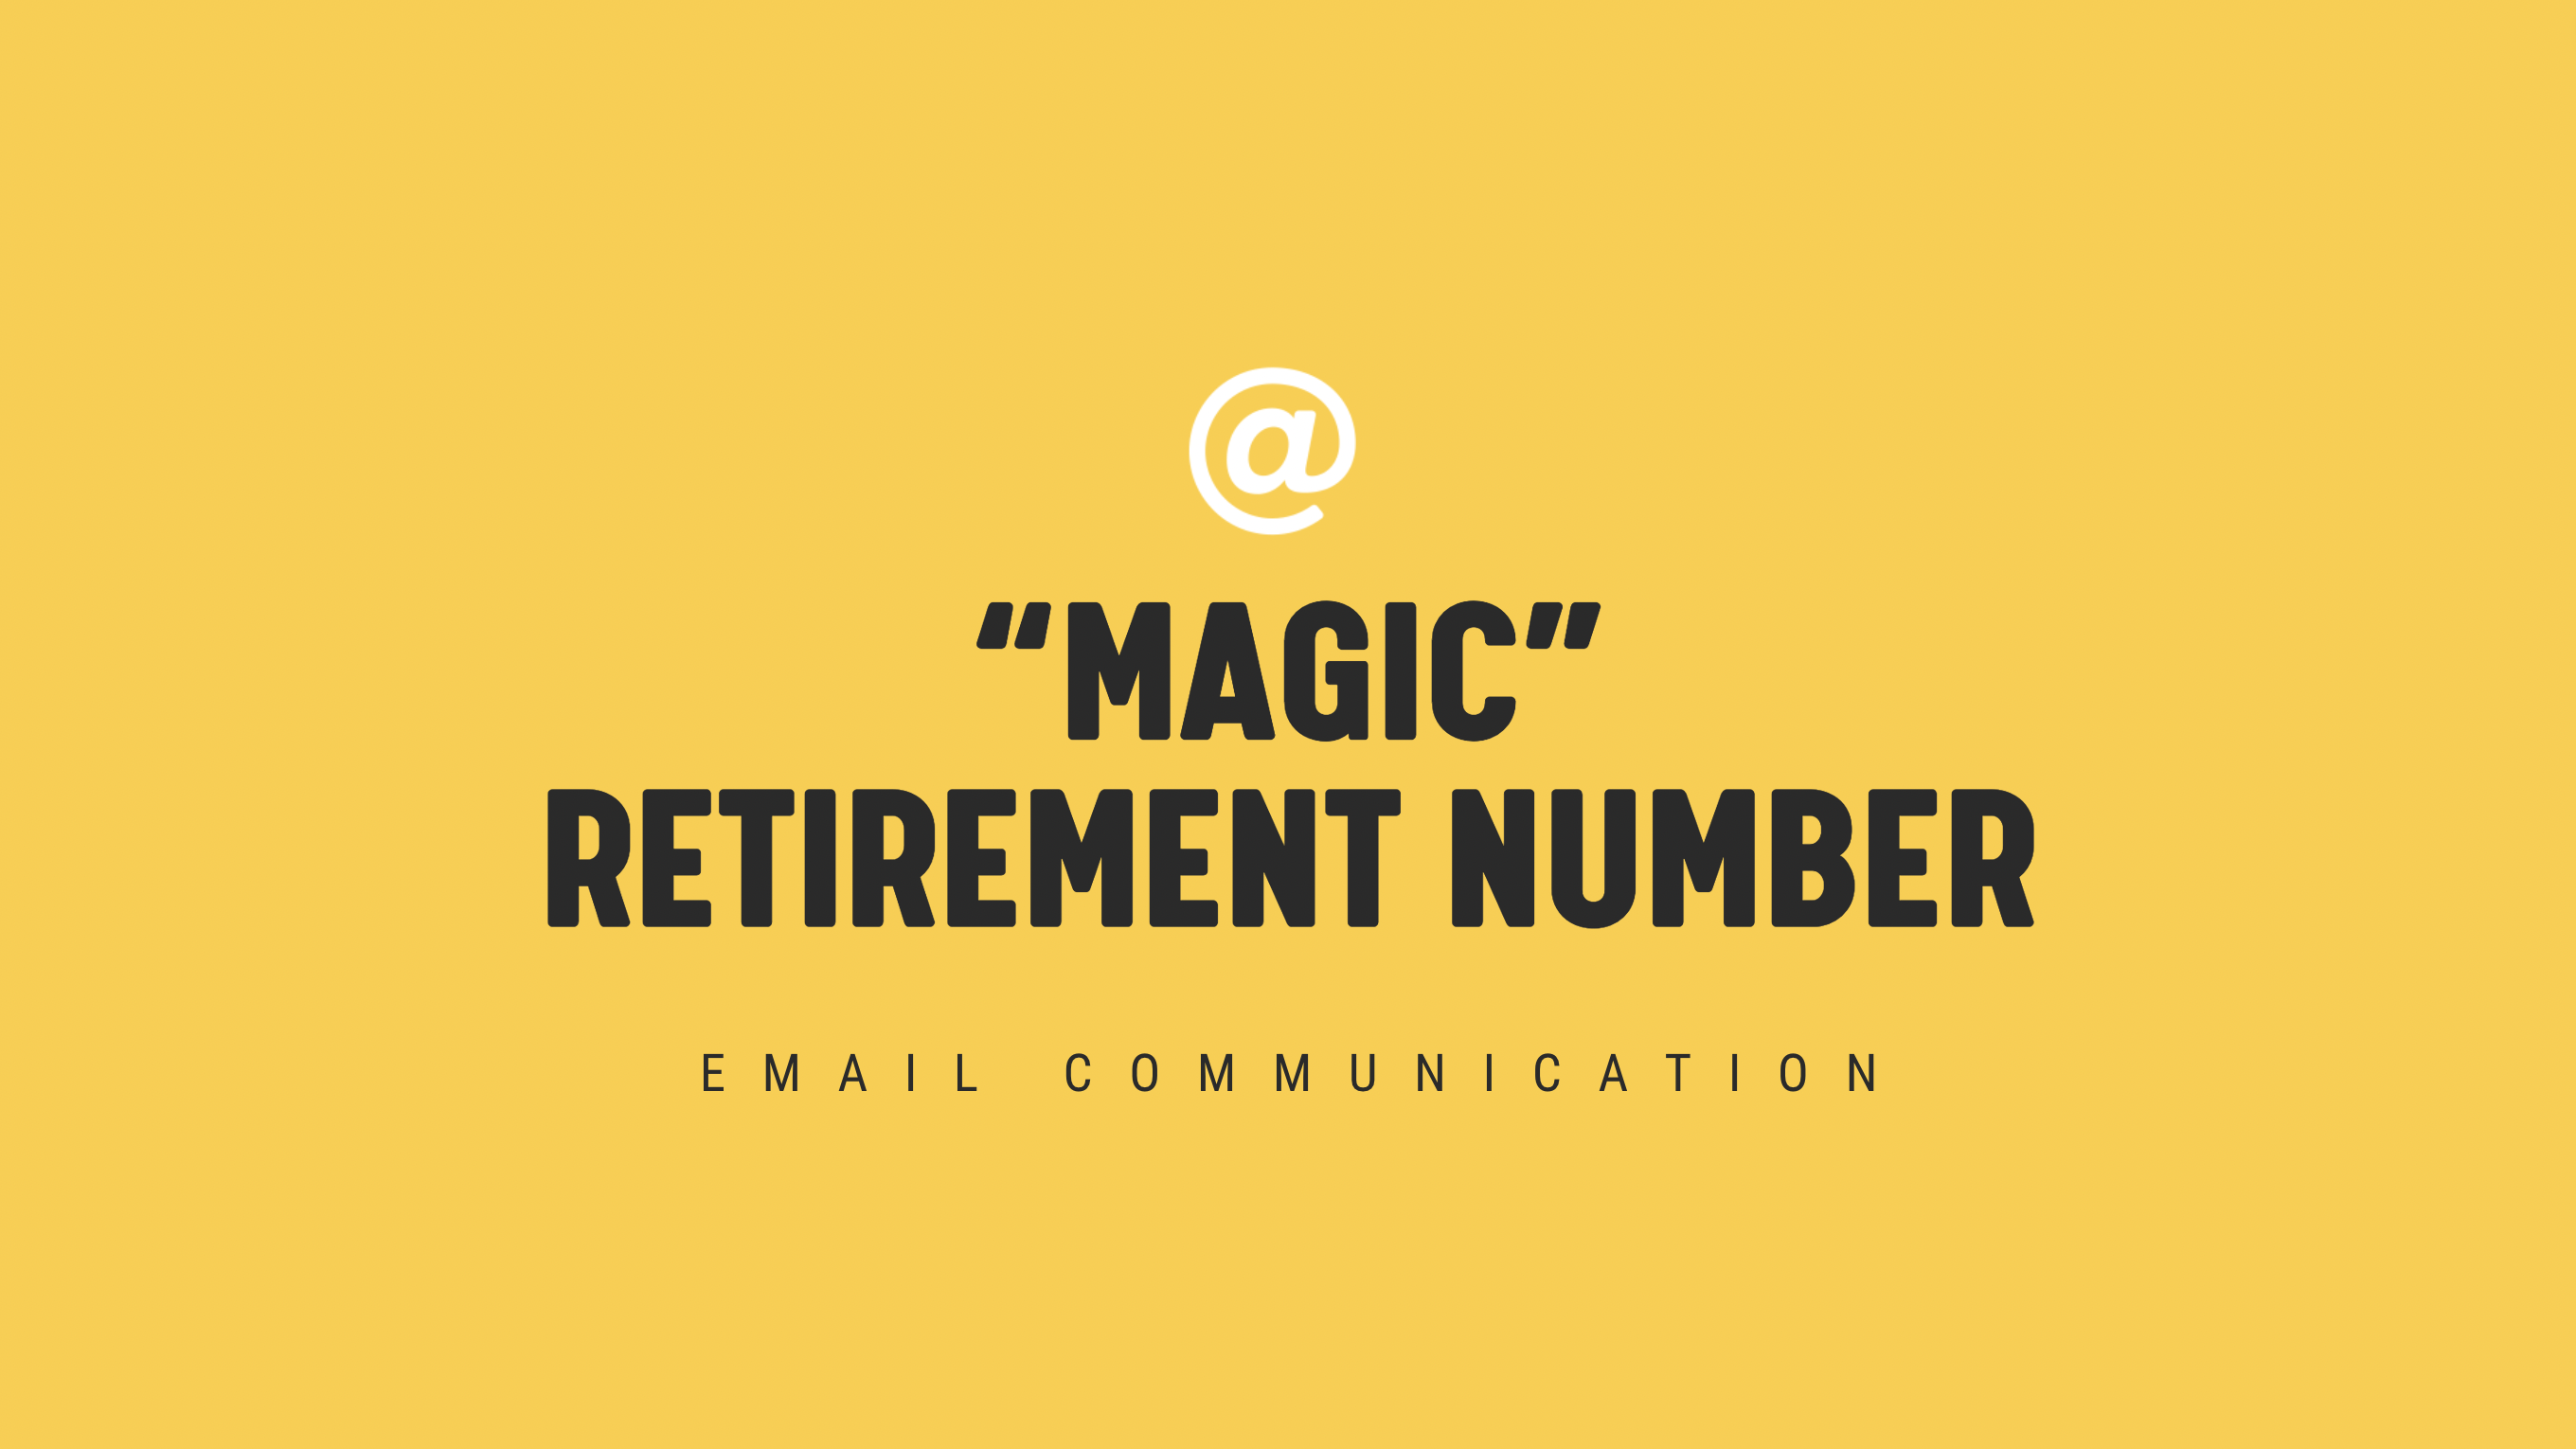 [NEW] “Magic” Retirement Number - Timely Email